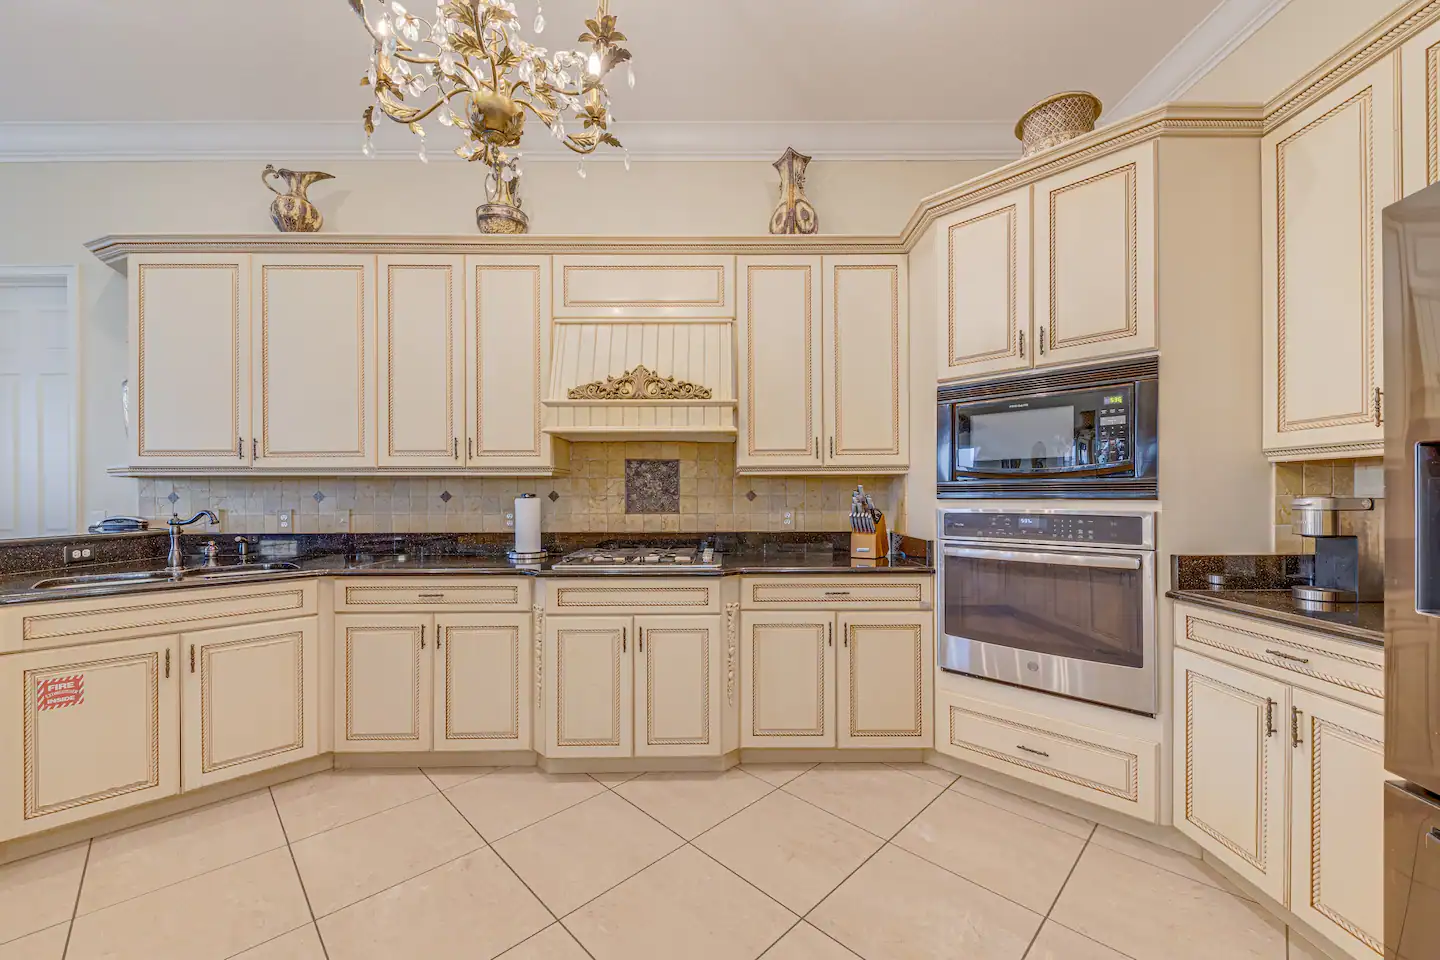 This spacious kitchen is the perfect place to cook, eat, and relax.